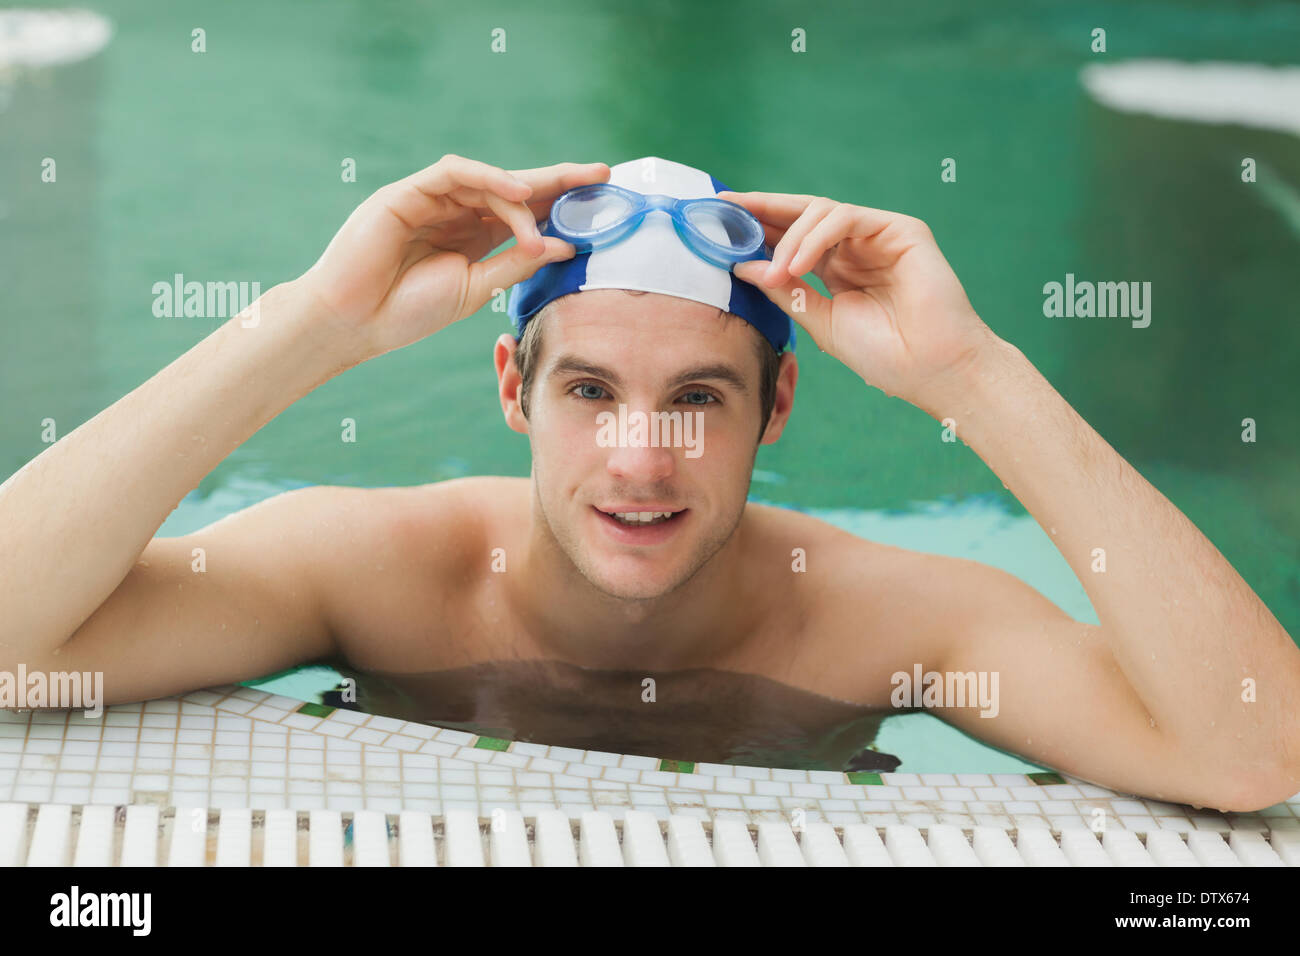 Man taking off his swimming goggles Stock Photo